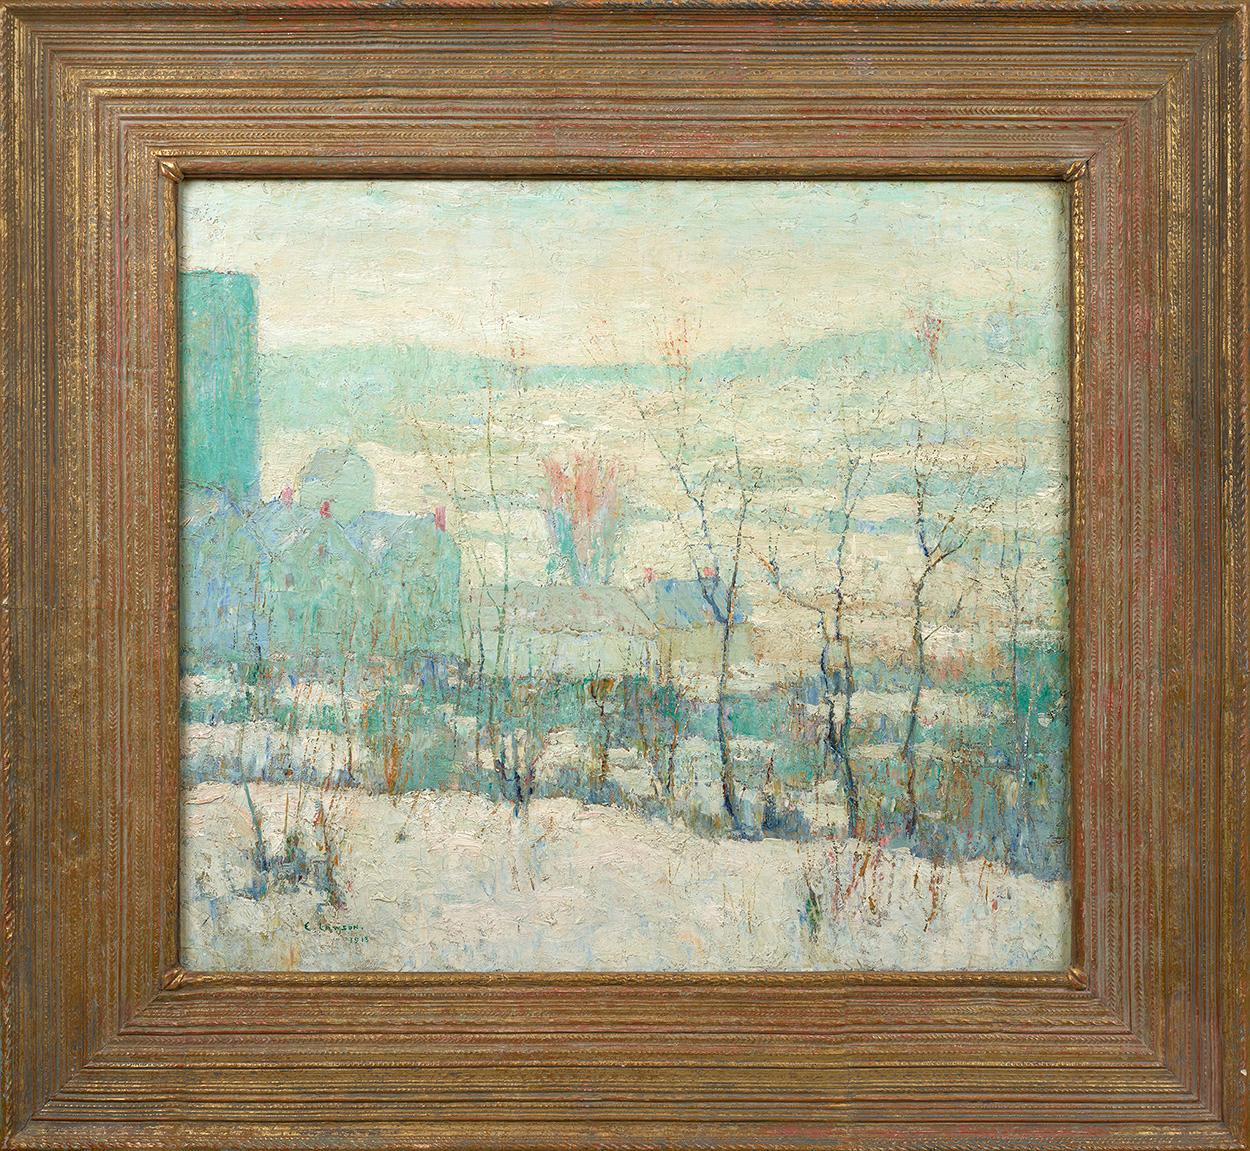 New York Farm in Winter, 1913 - Painting by Ernest Lawson